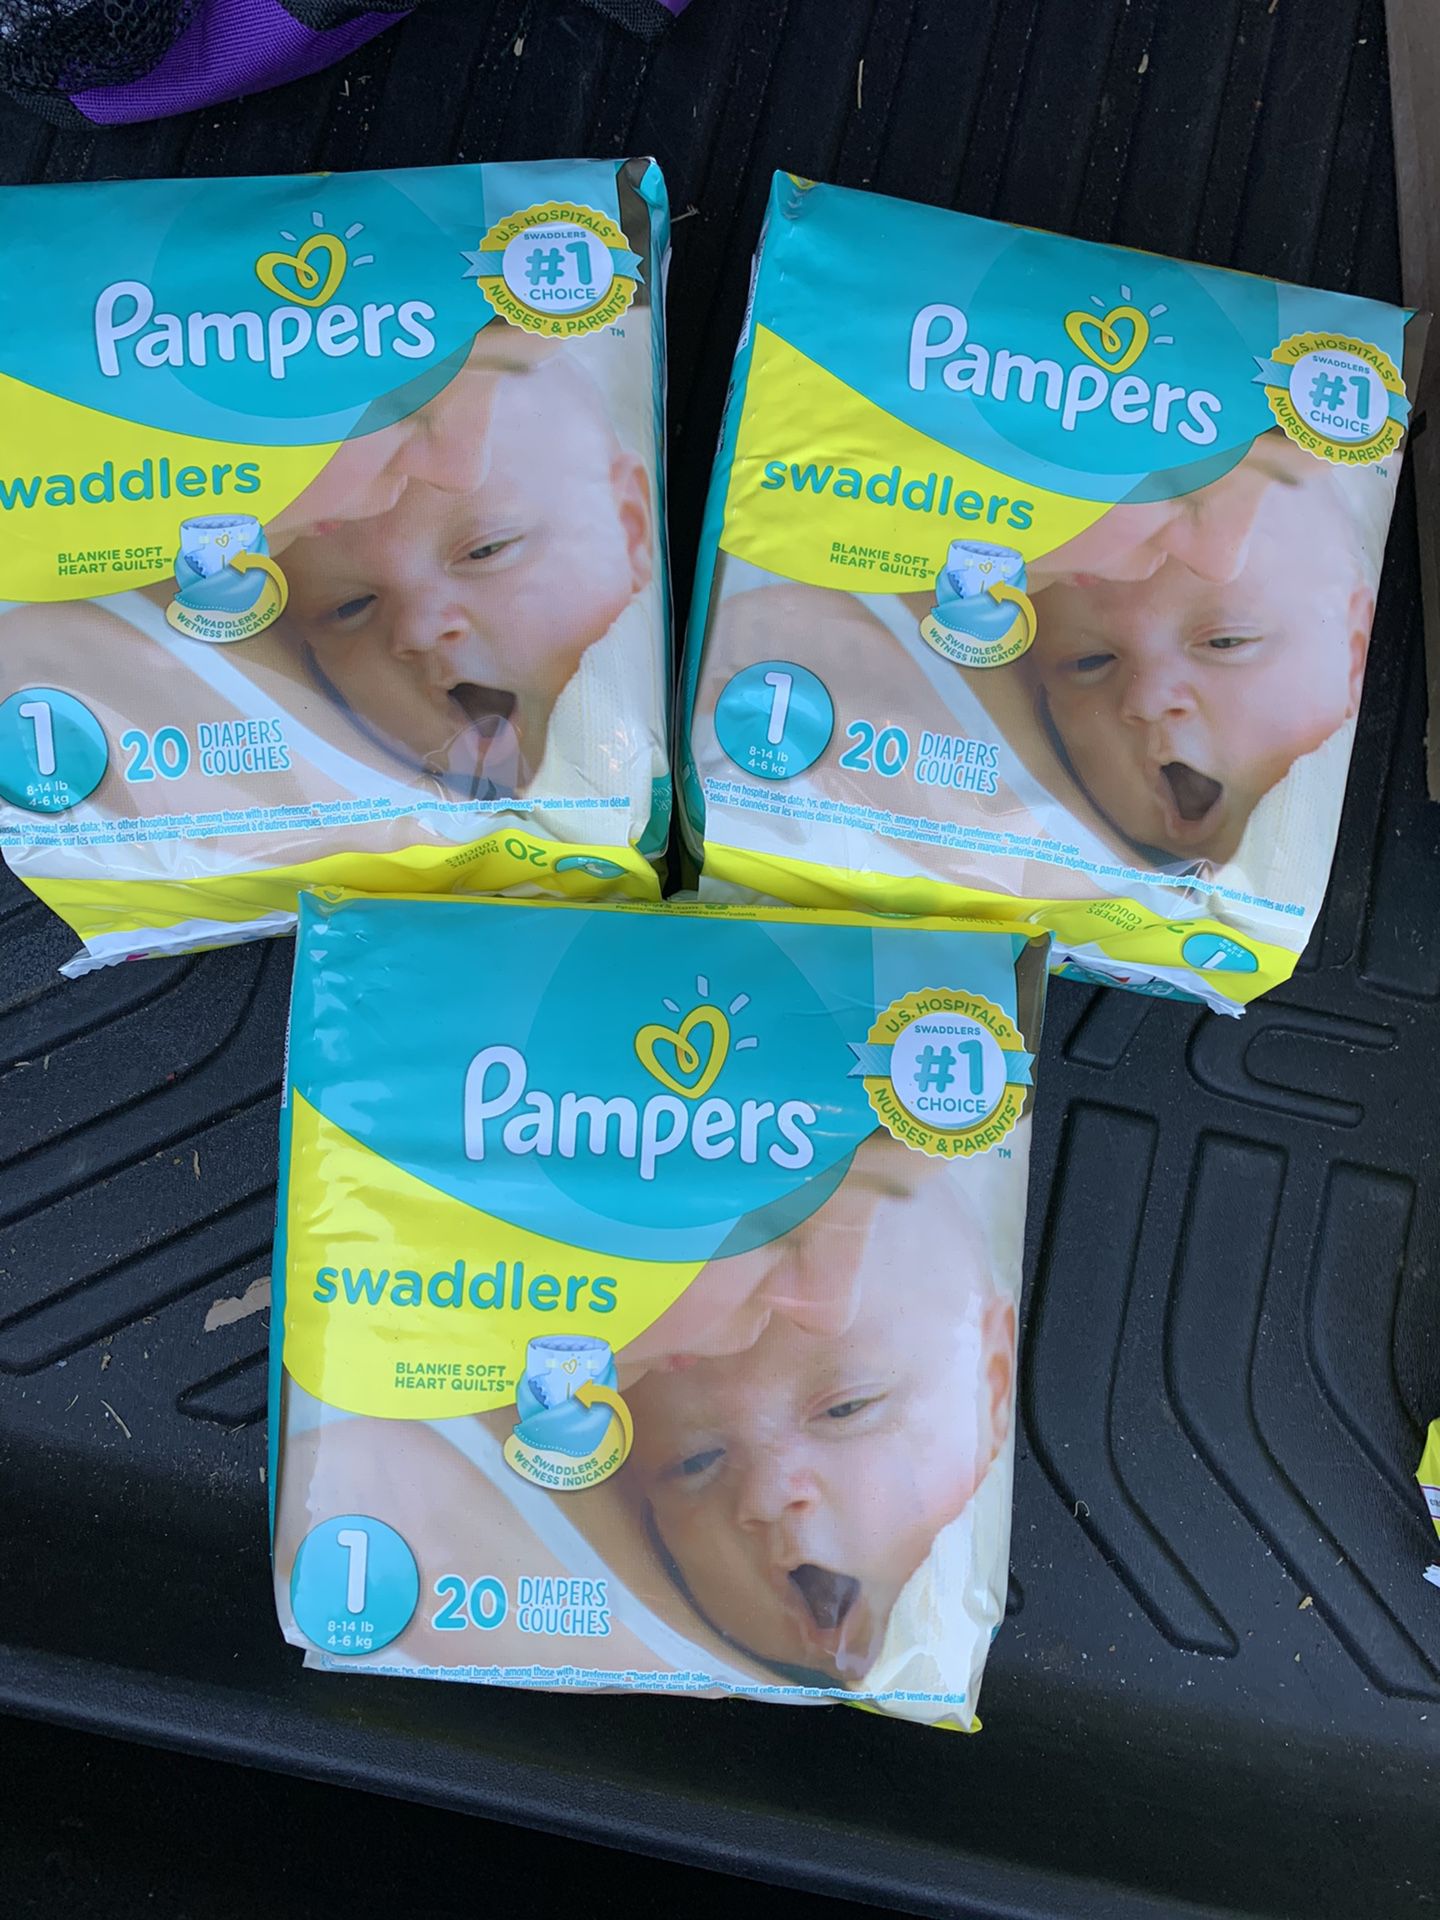 Pampers size 1 diapers new 3 bags for $10